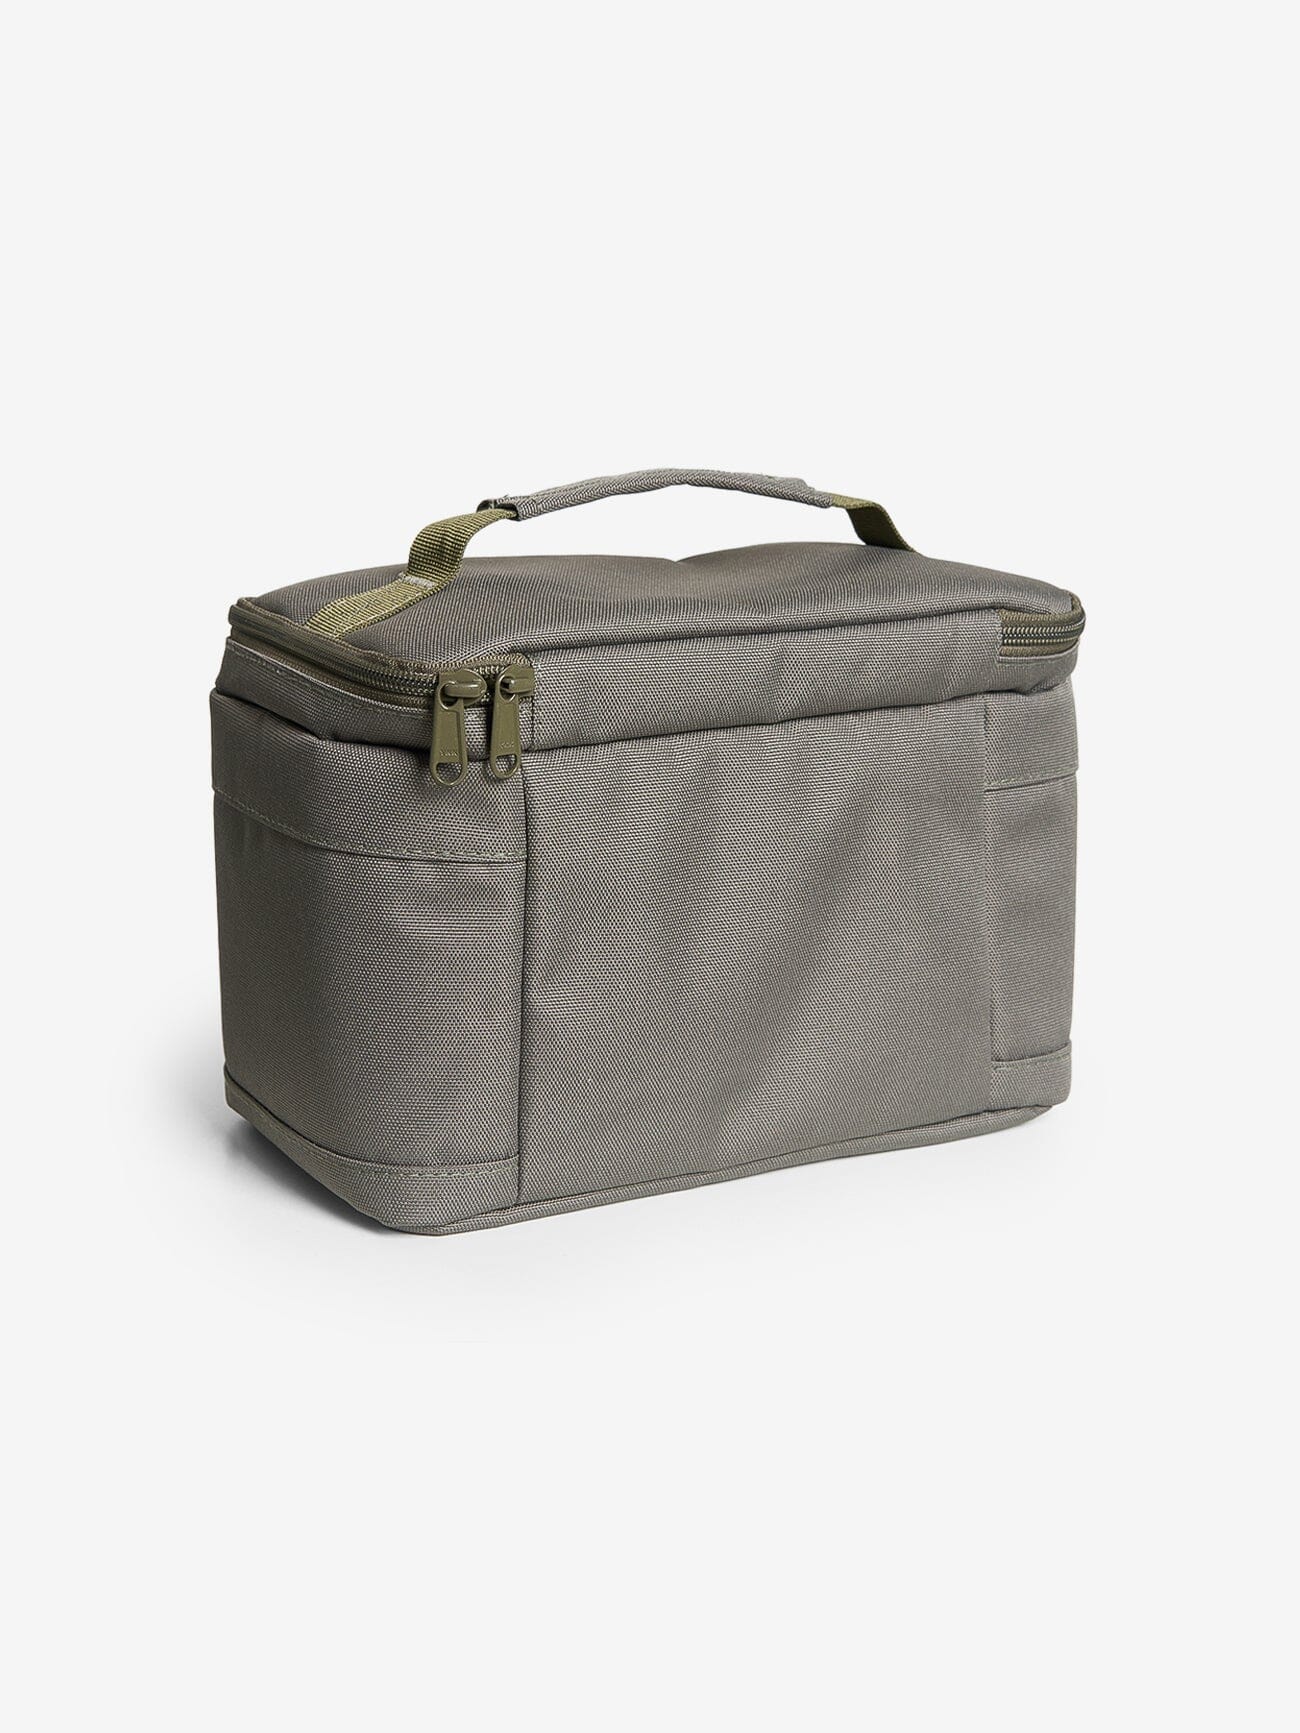 Thrills Lunch Cooler - Army Green